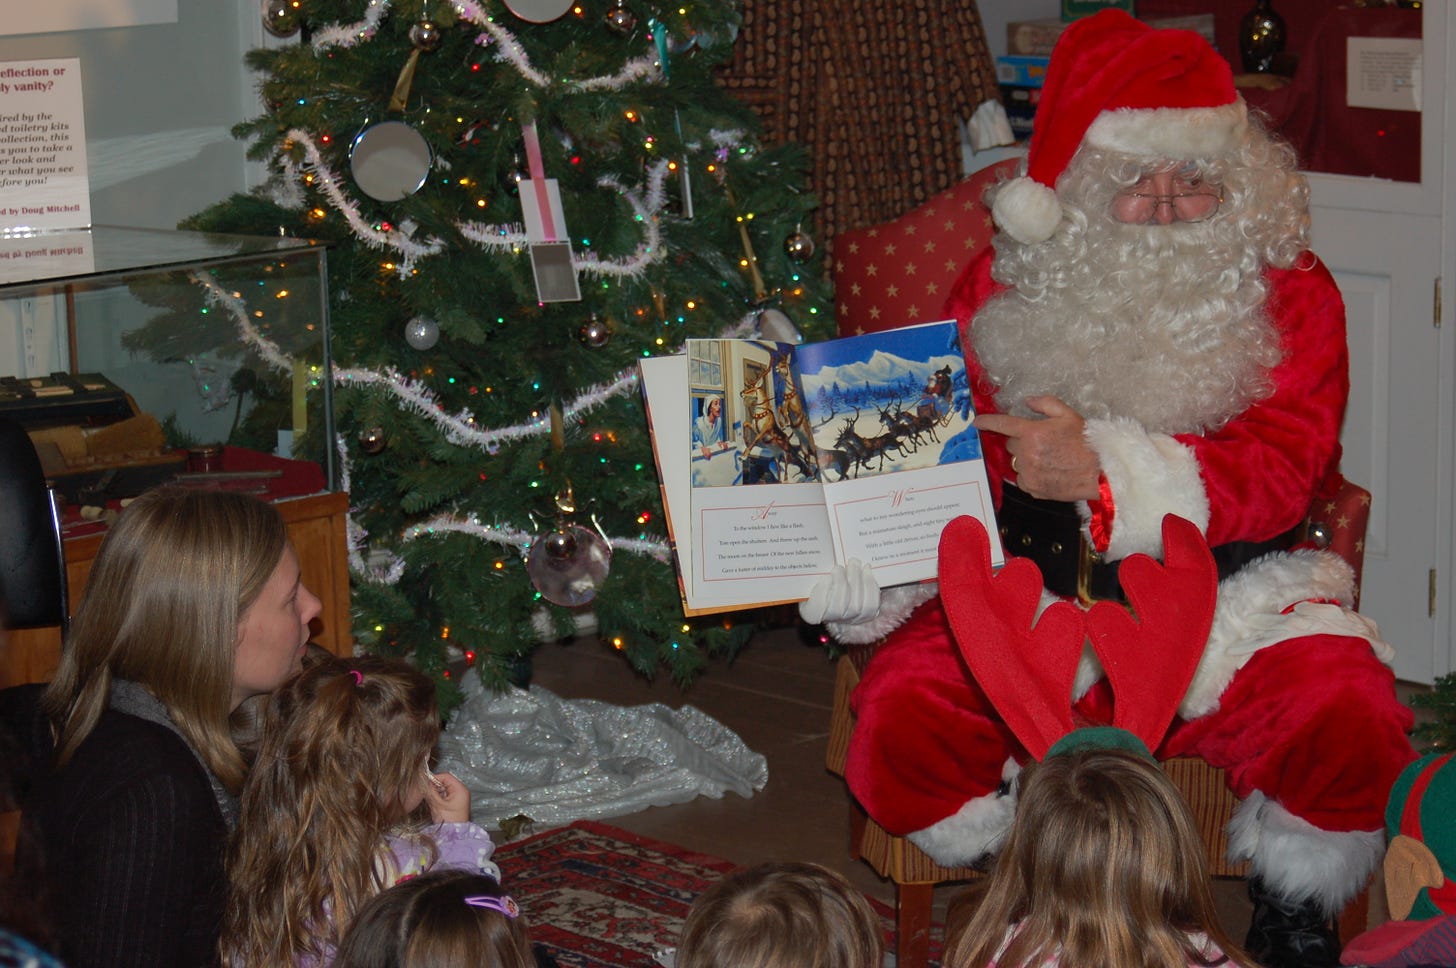 Color photograph of Santa Claus reading twas the night before christmas to a group of children in front of a christmas tree